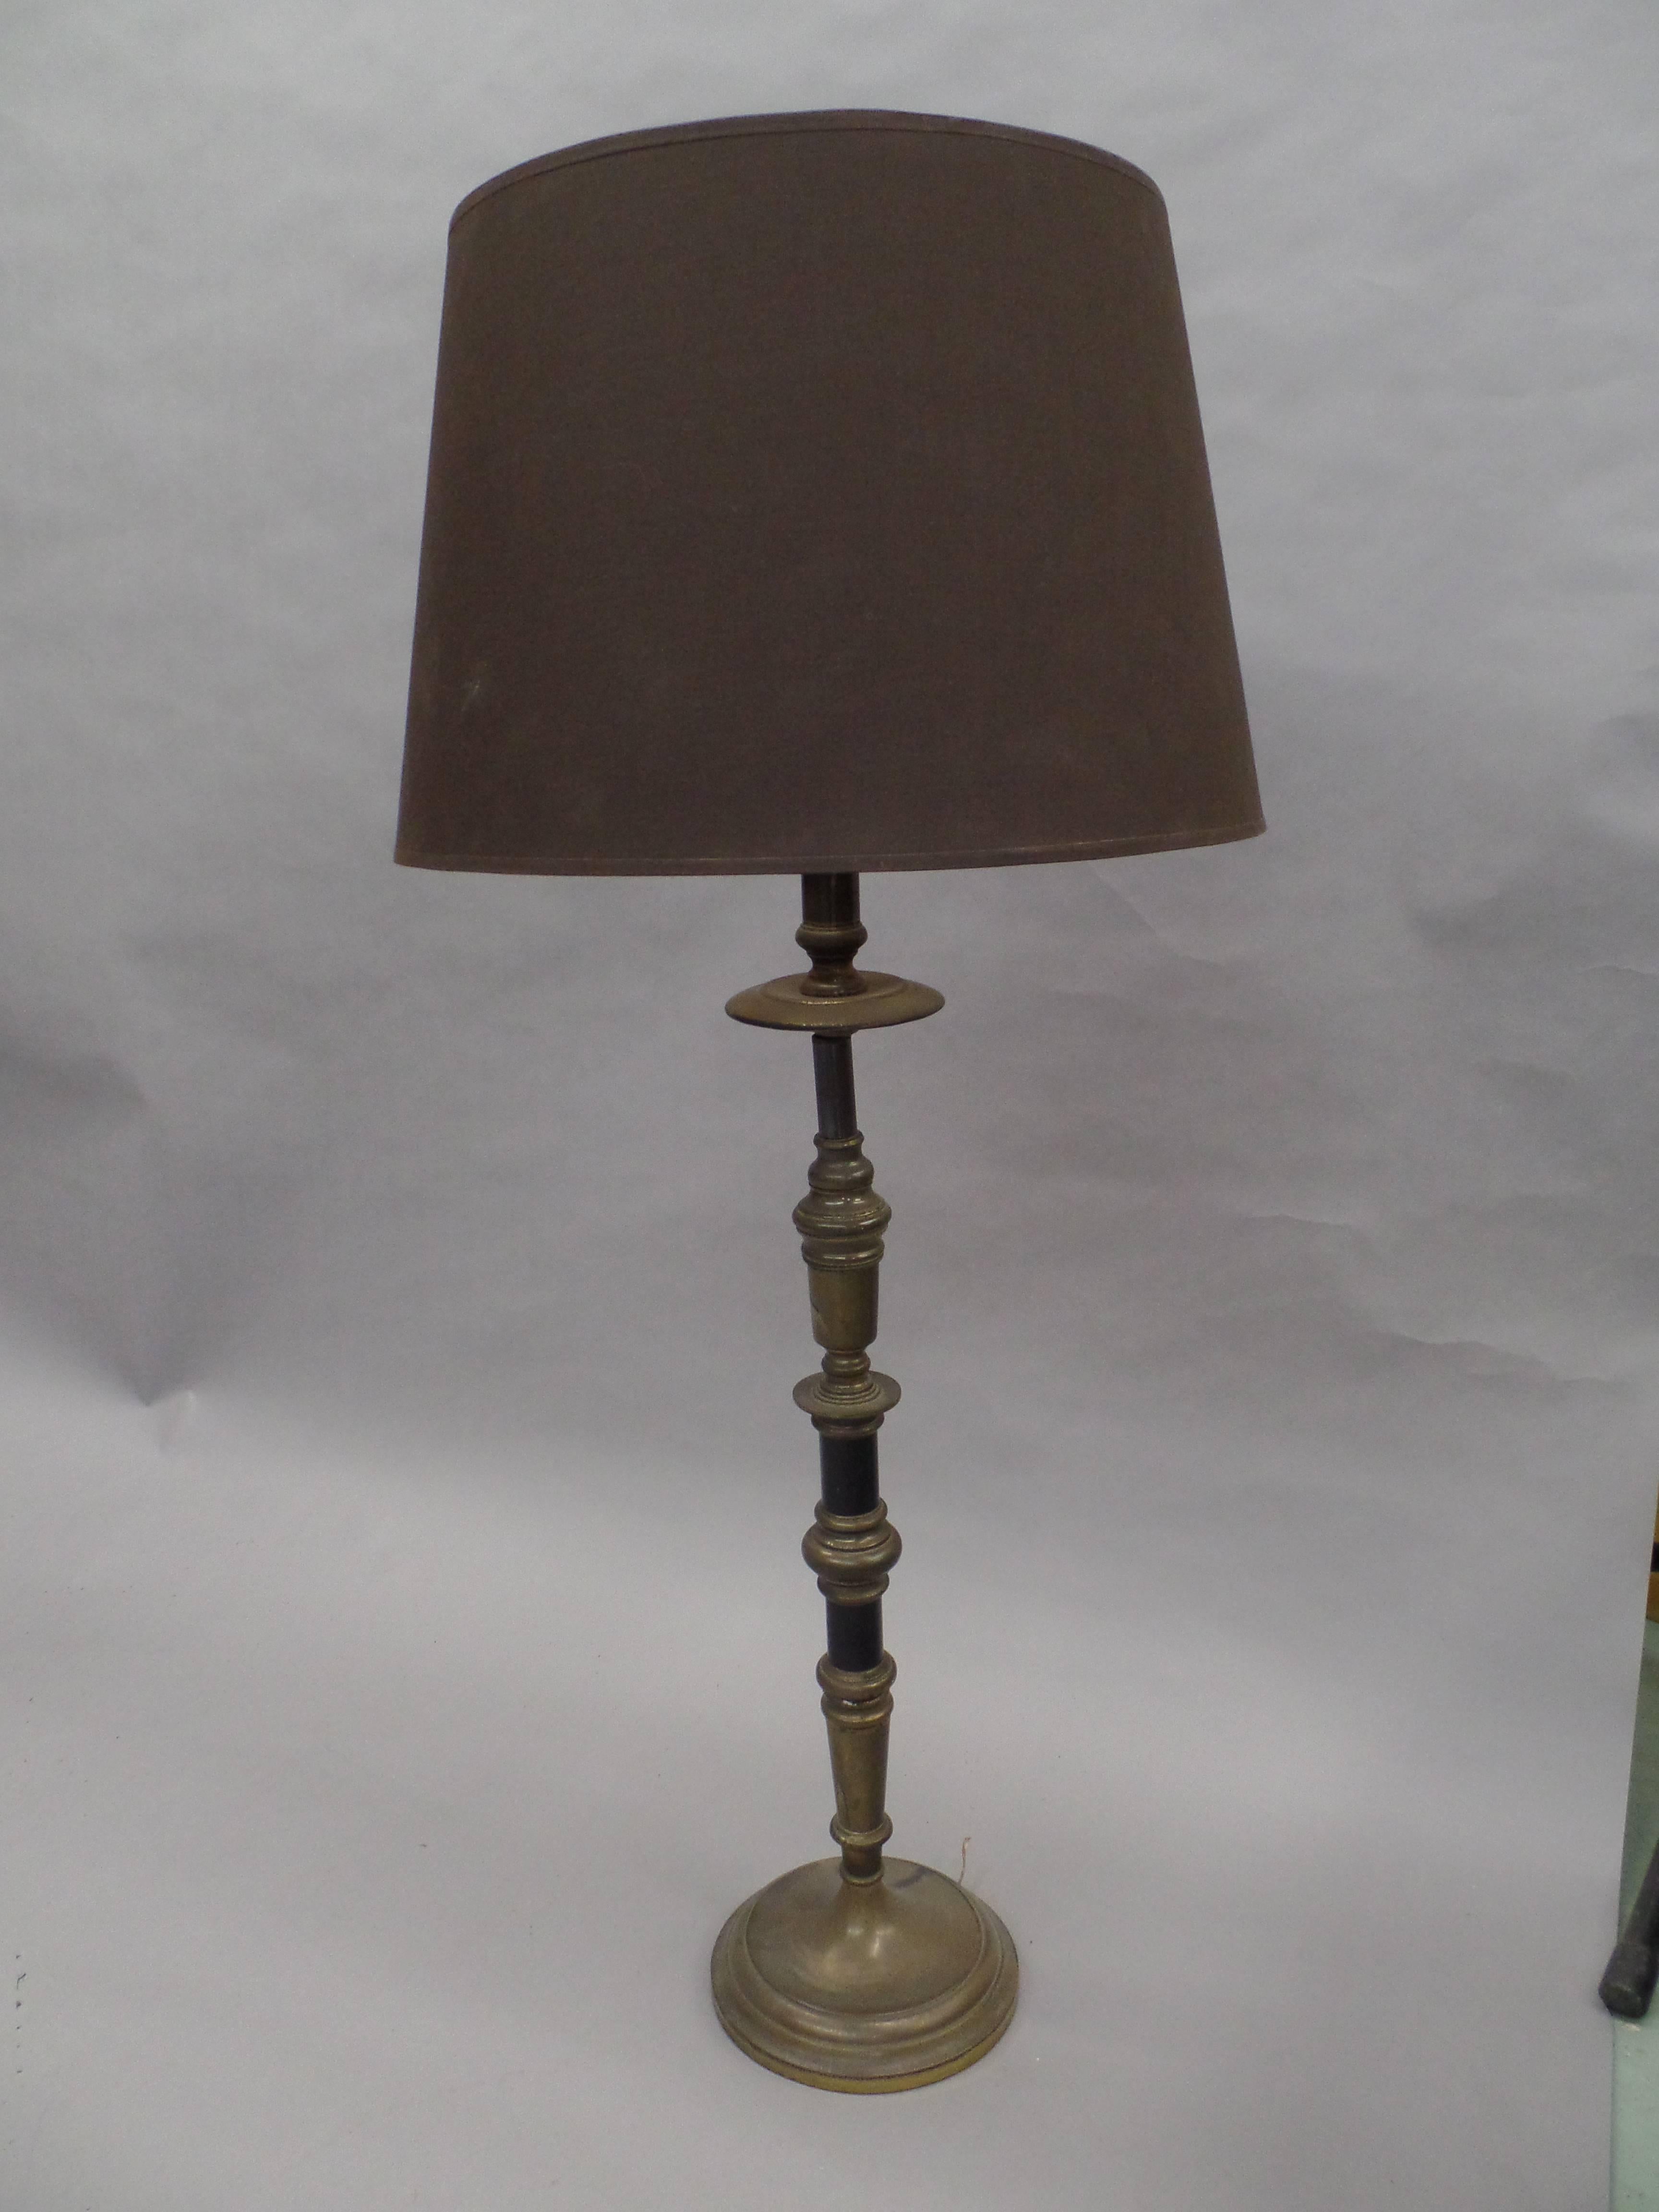 Pair of elegant and refined French Classic candlestick formed table lamps in silvered brass and black enamel.

Shades are for demonstration purposes only.